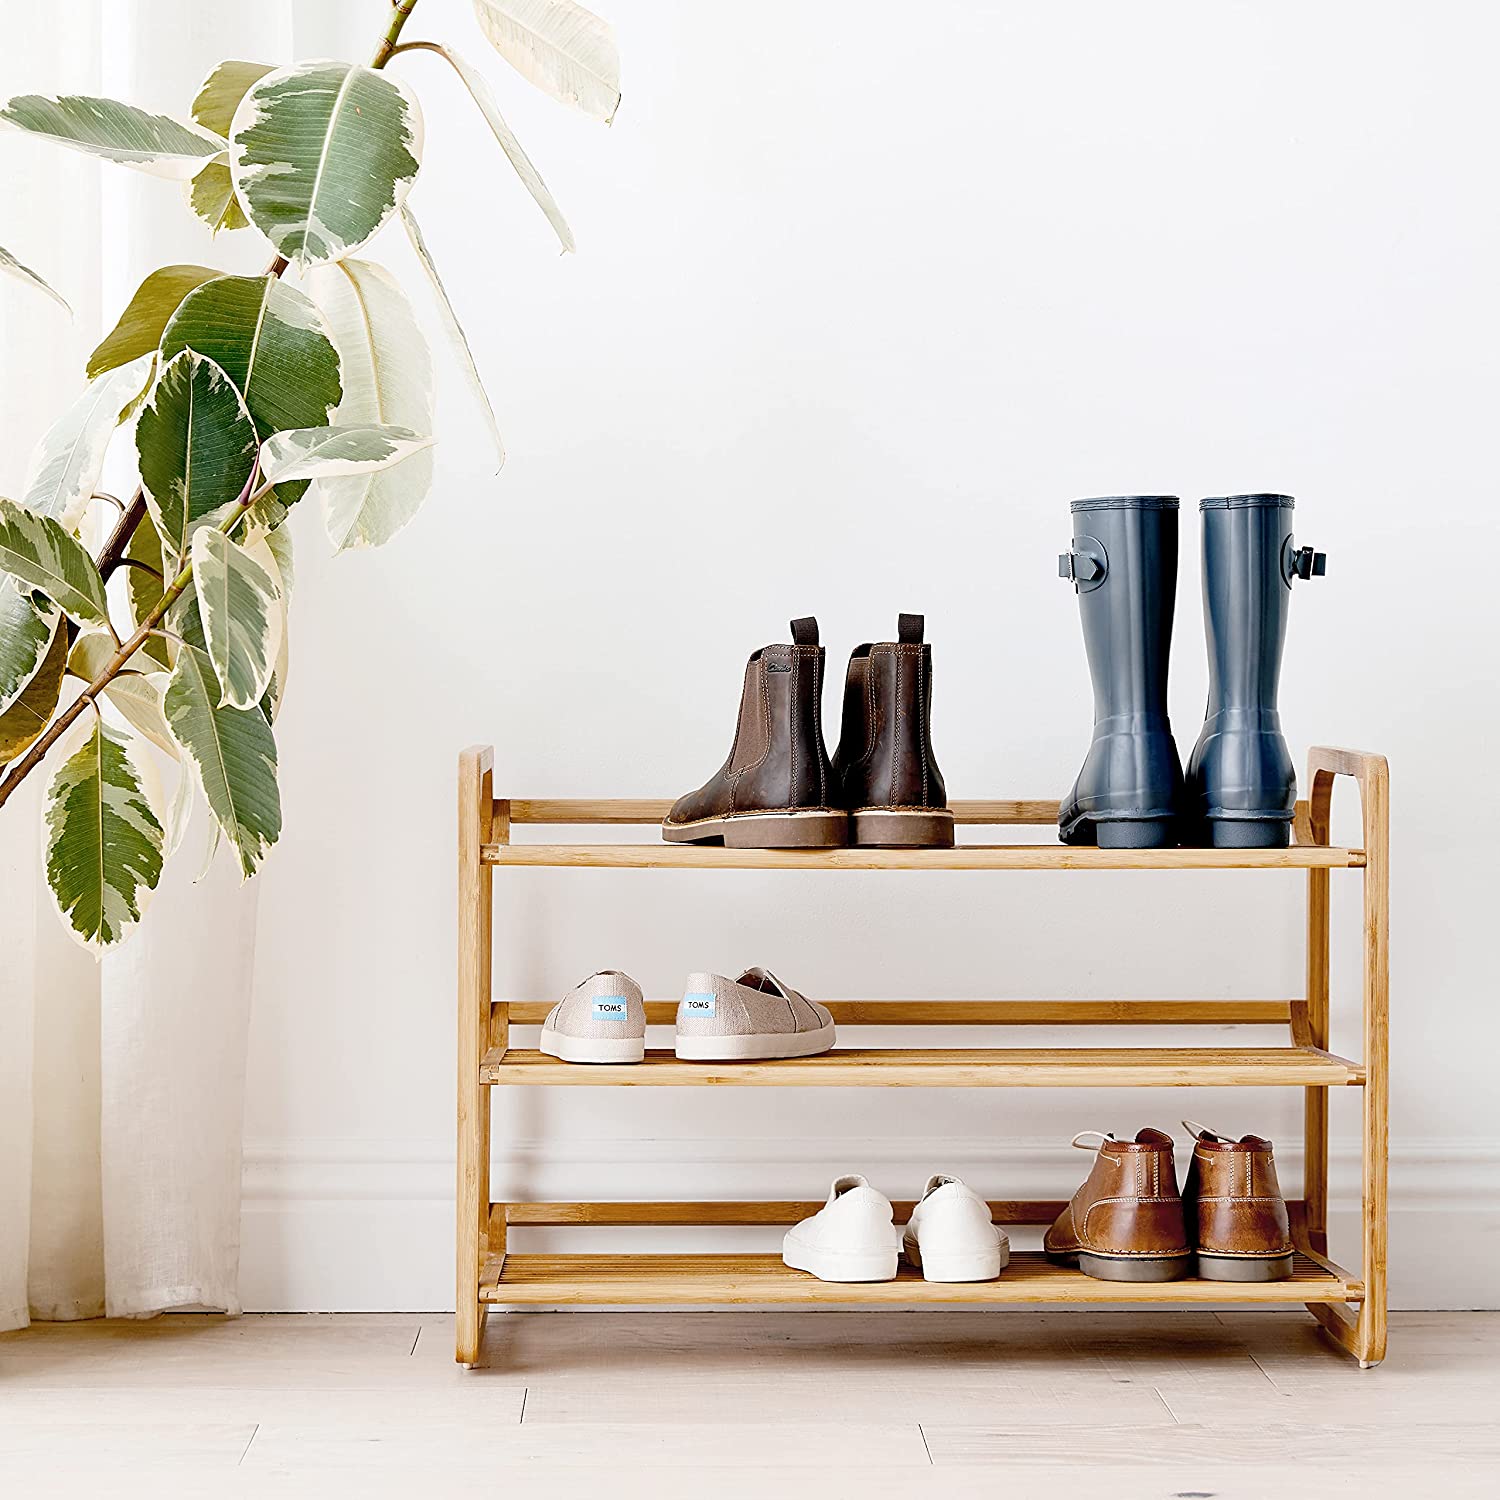 https://www.home-designing.com/wp-content/uploads/2022/03/minimalist-bamboo-shoe-rack-three-tier-storage-slatted-low-shelving-for-footwear-twelve-pair-capacity-for-sneakers-and-boots-slipper-entryway-shelves-for-sale-online.jpg